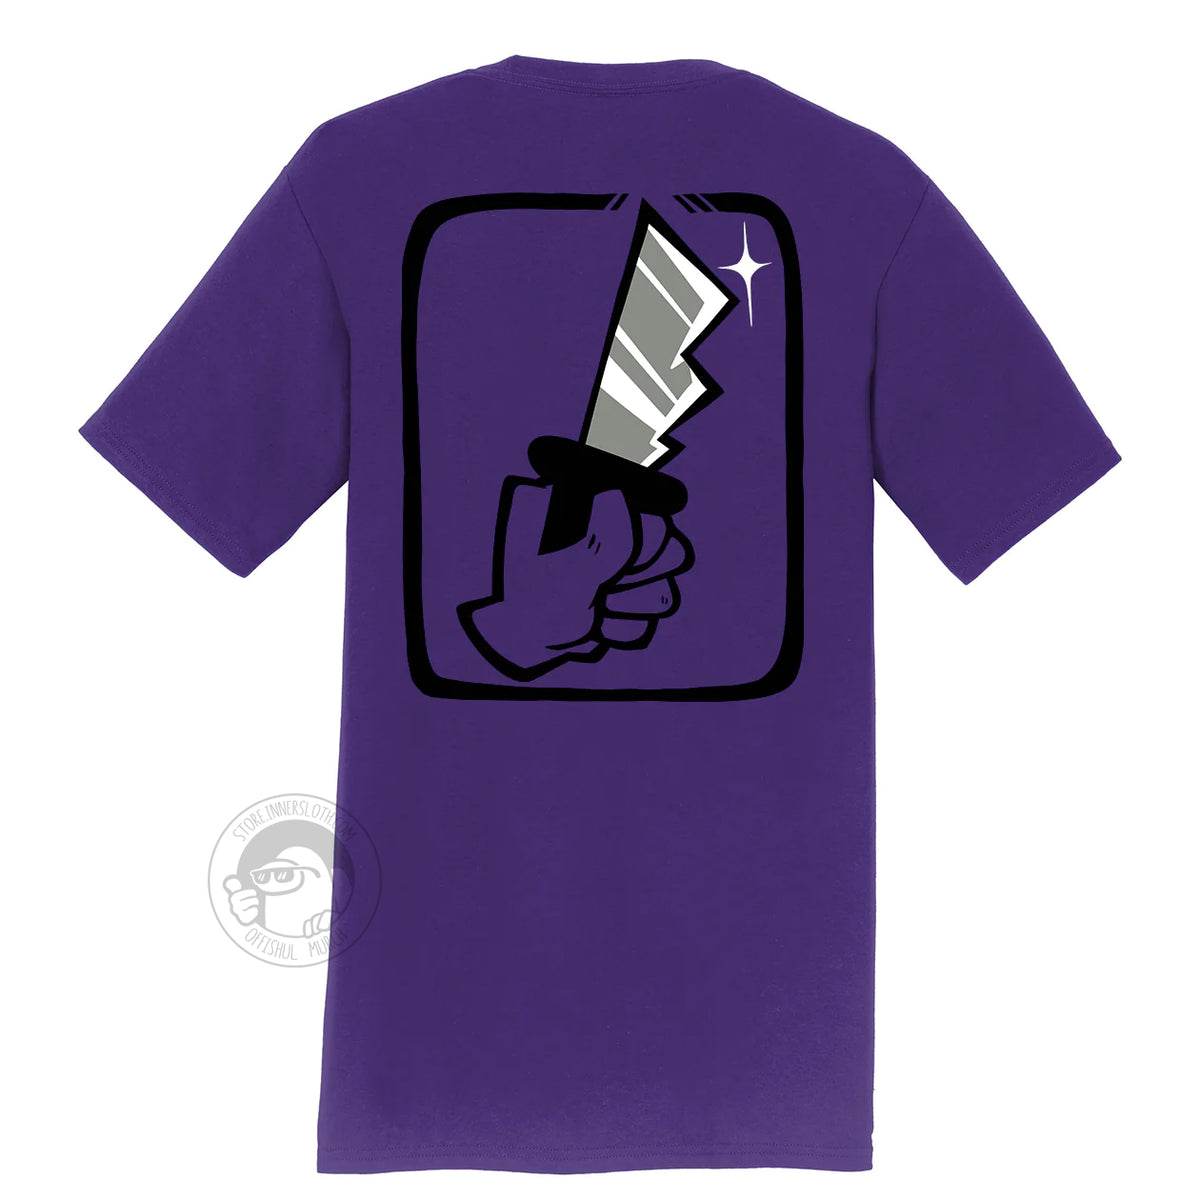 A product photo of the back of the Among Us: Shhhirt in purple. The back art is a large hand holding a knife.